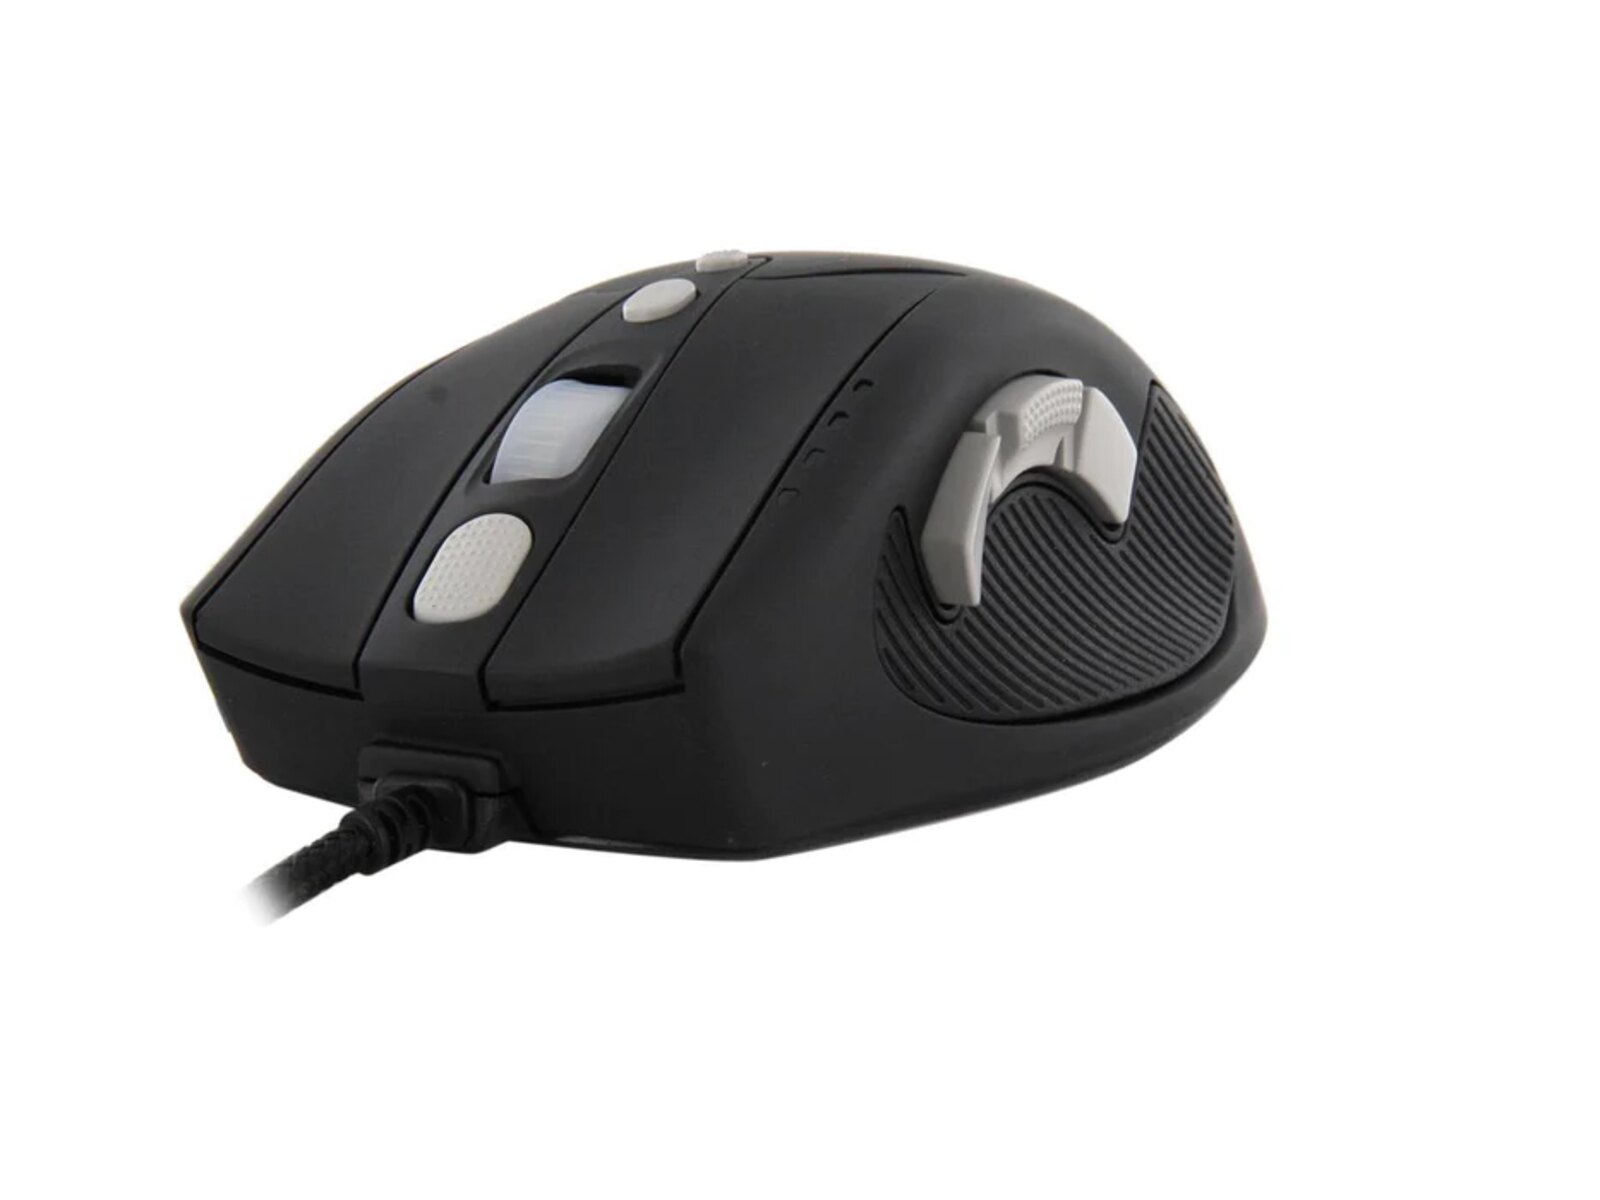 how-can-i-install-software-for-my-rosewill-gaming-mouse-rgm-1000